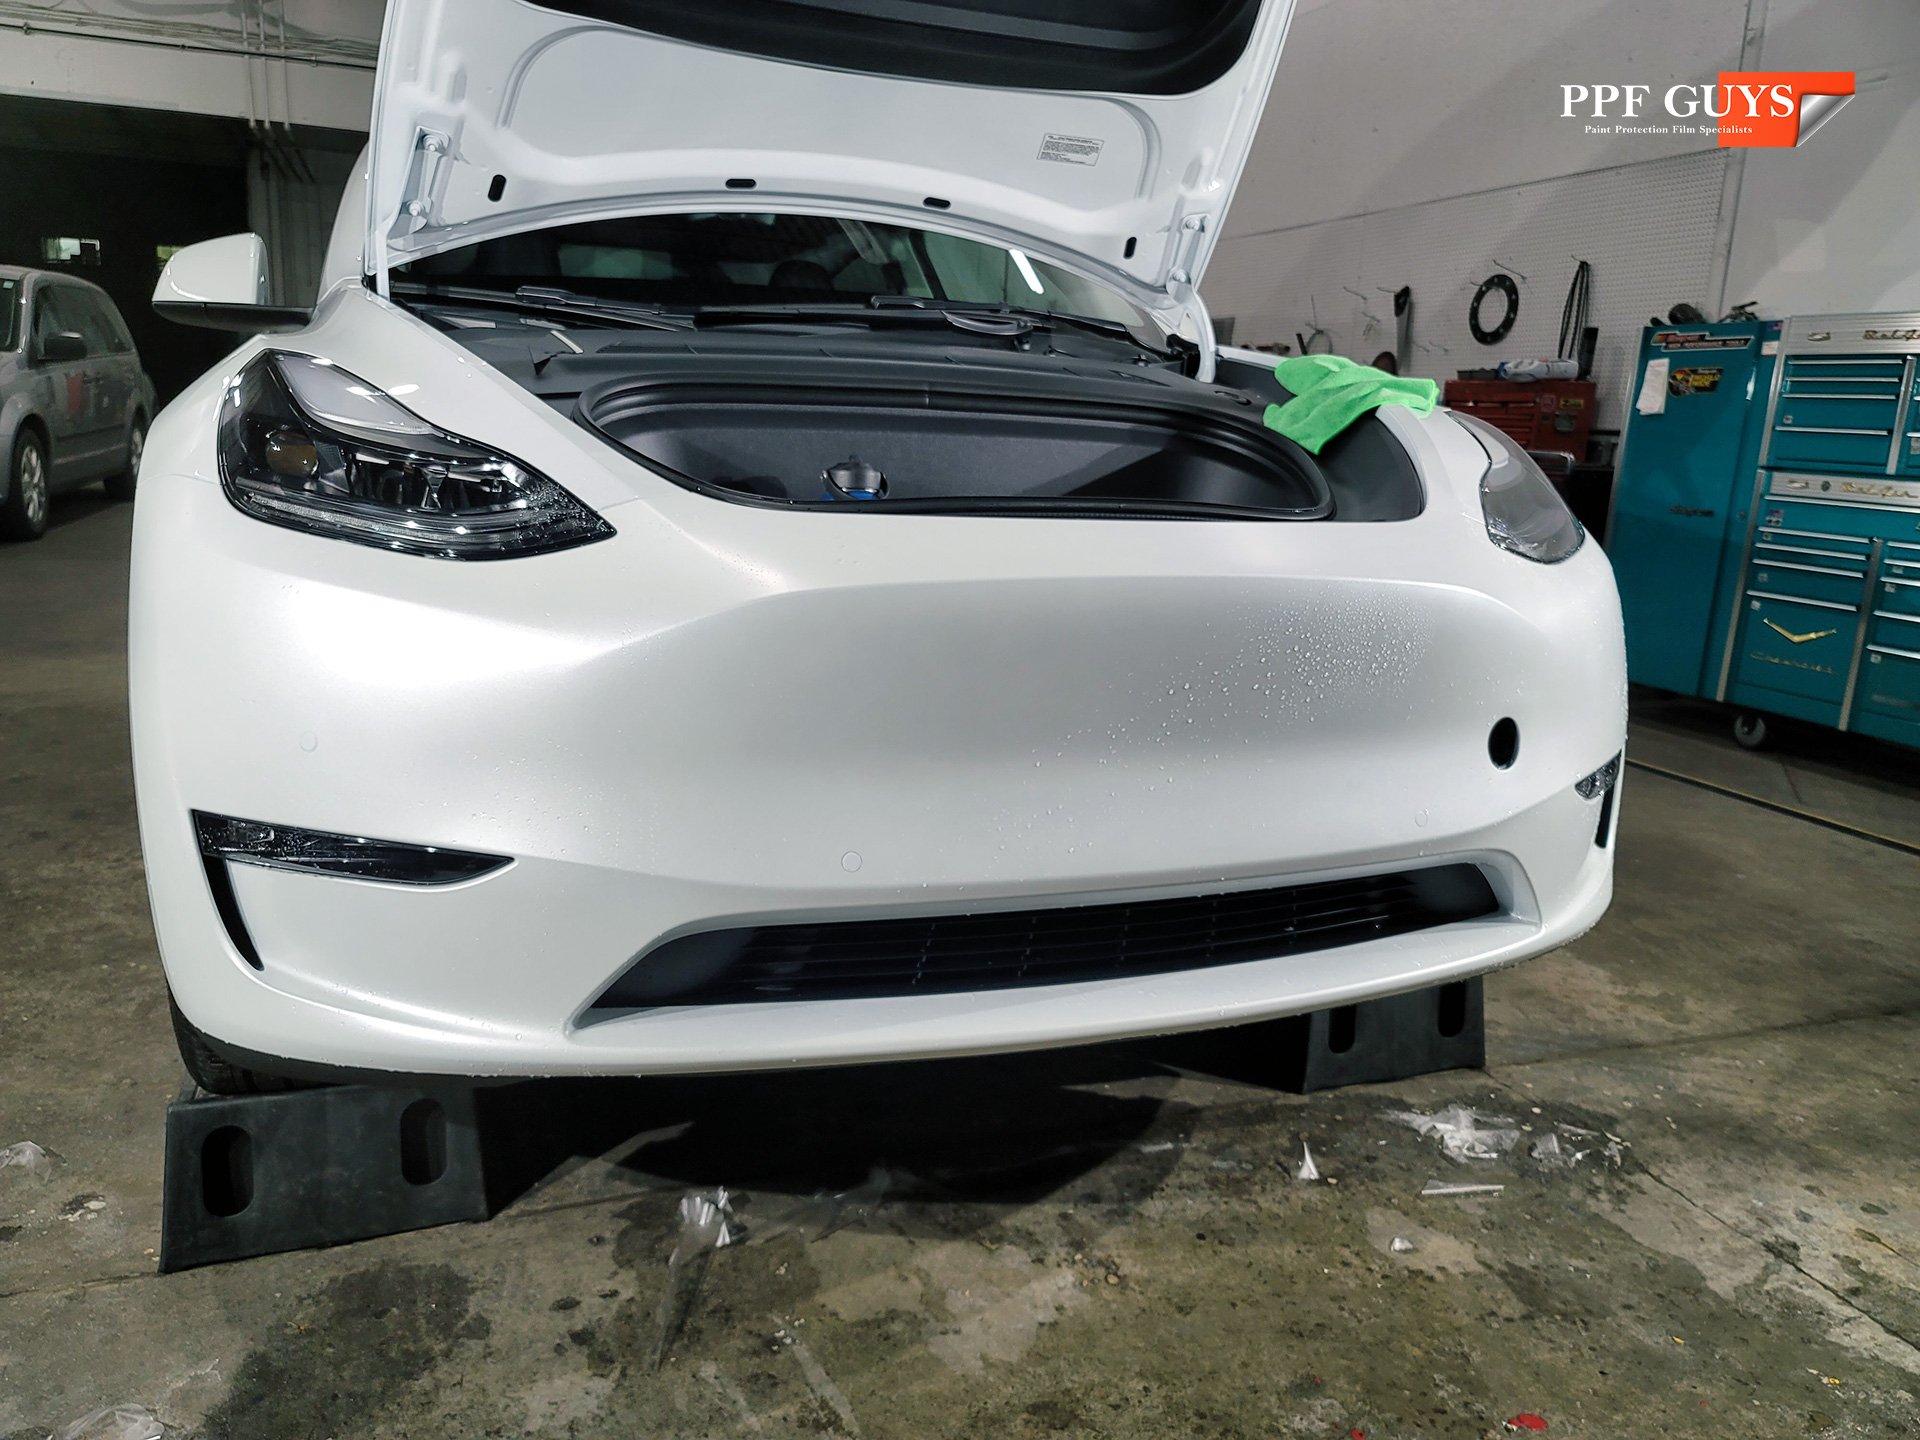 PPF Guys Model Y White Xpel Stealth, ceramic, painted emblems (3).jpg